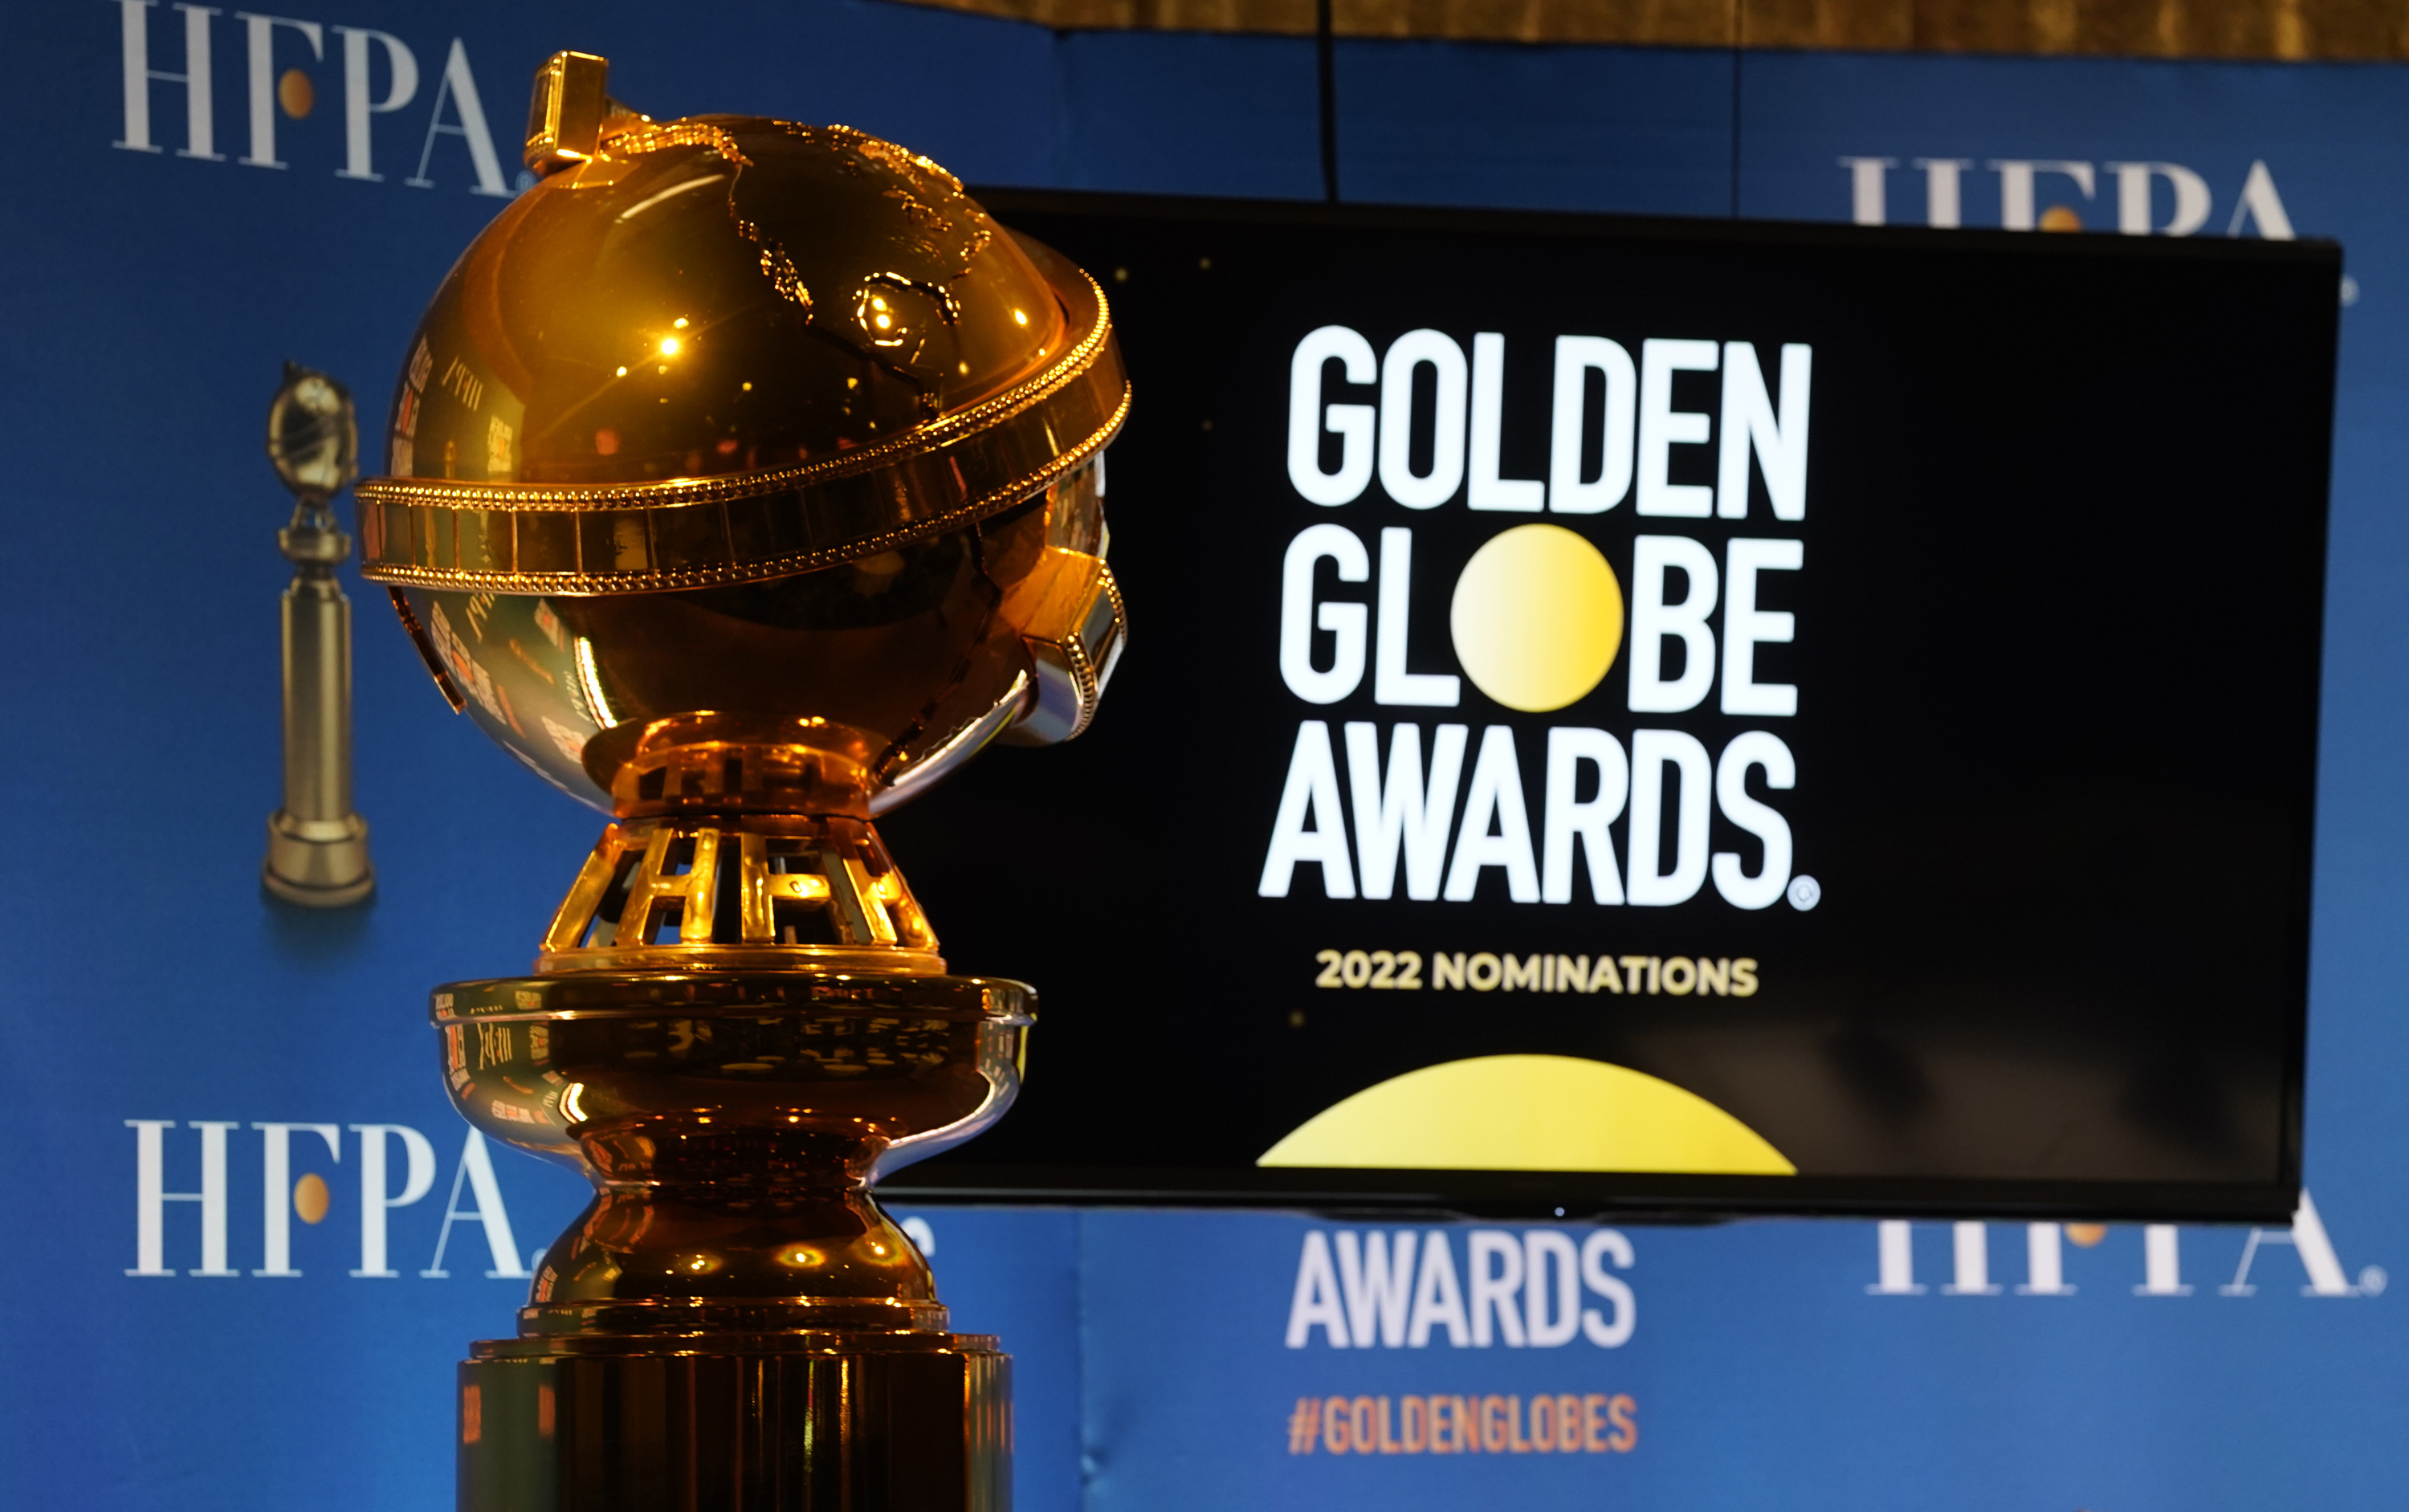 A Golden Globe statue appears at the nominations event for 79th annual Golden Globe Awards at the Beverly Hilton Hotel on Monday, Dec. 13, 2021, in Beverly Hills, Calif.